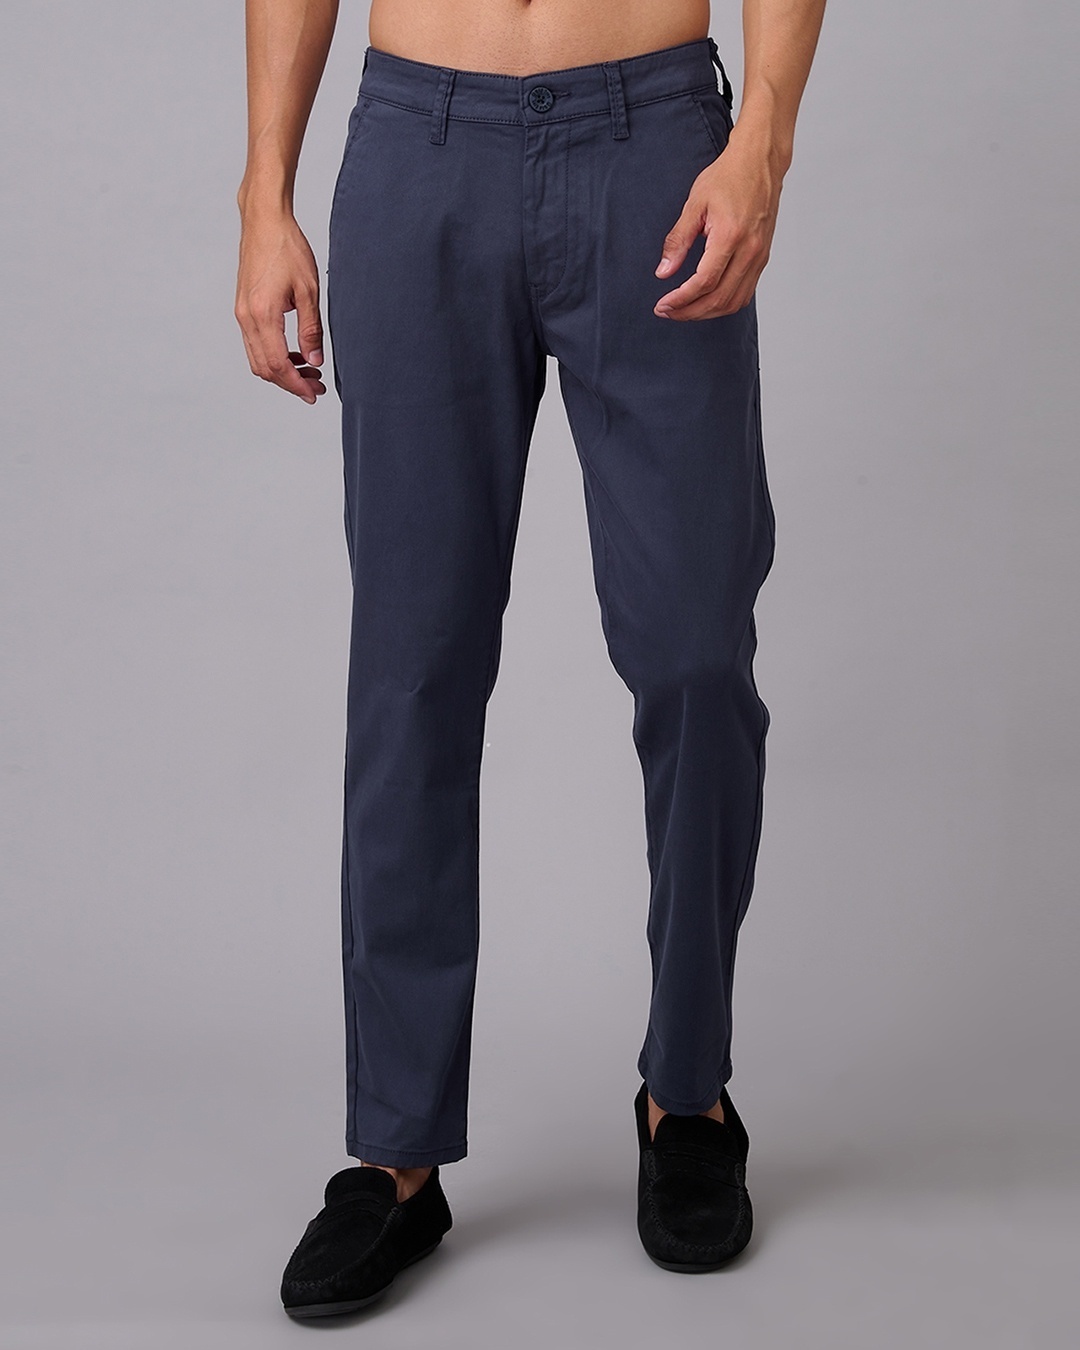 Buy RAYMOND Mens Slim Fit Trousers  Shoppers Stop